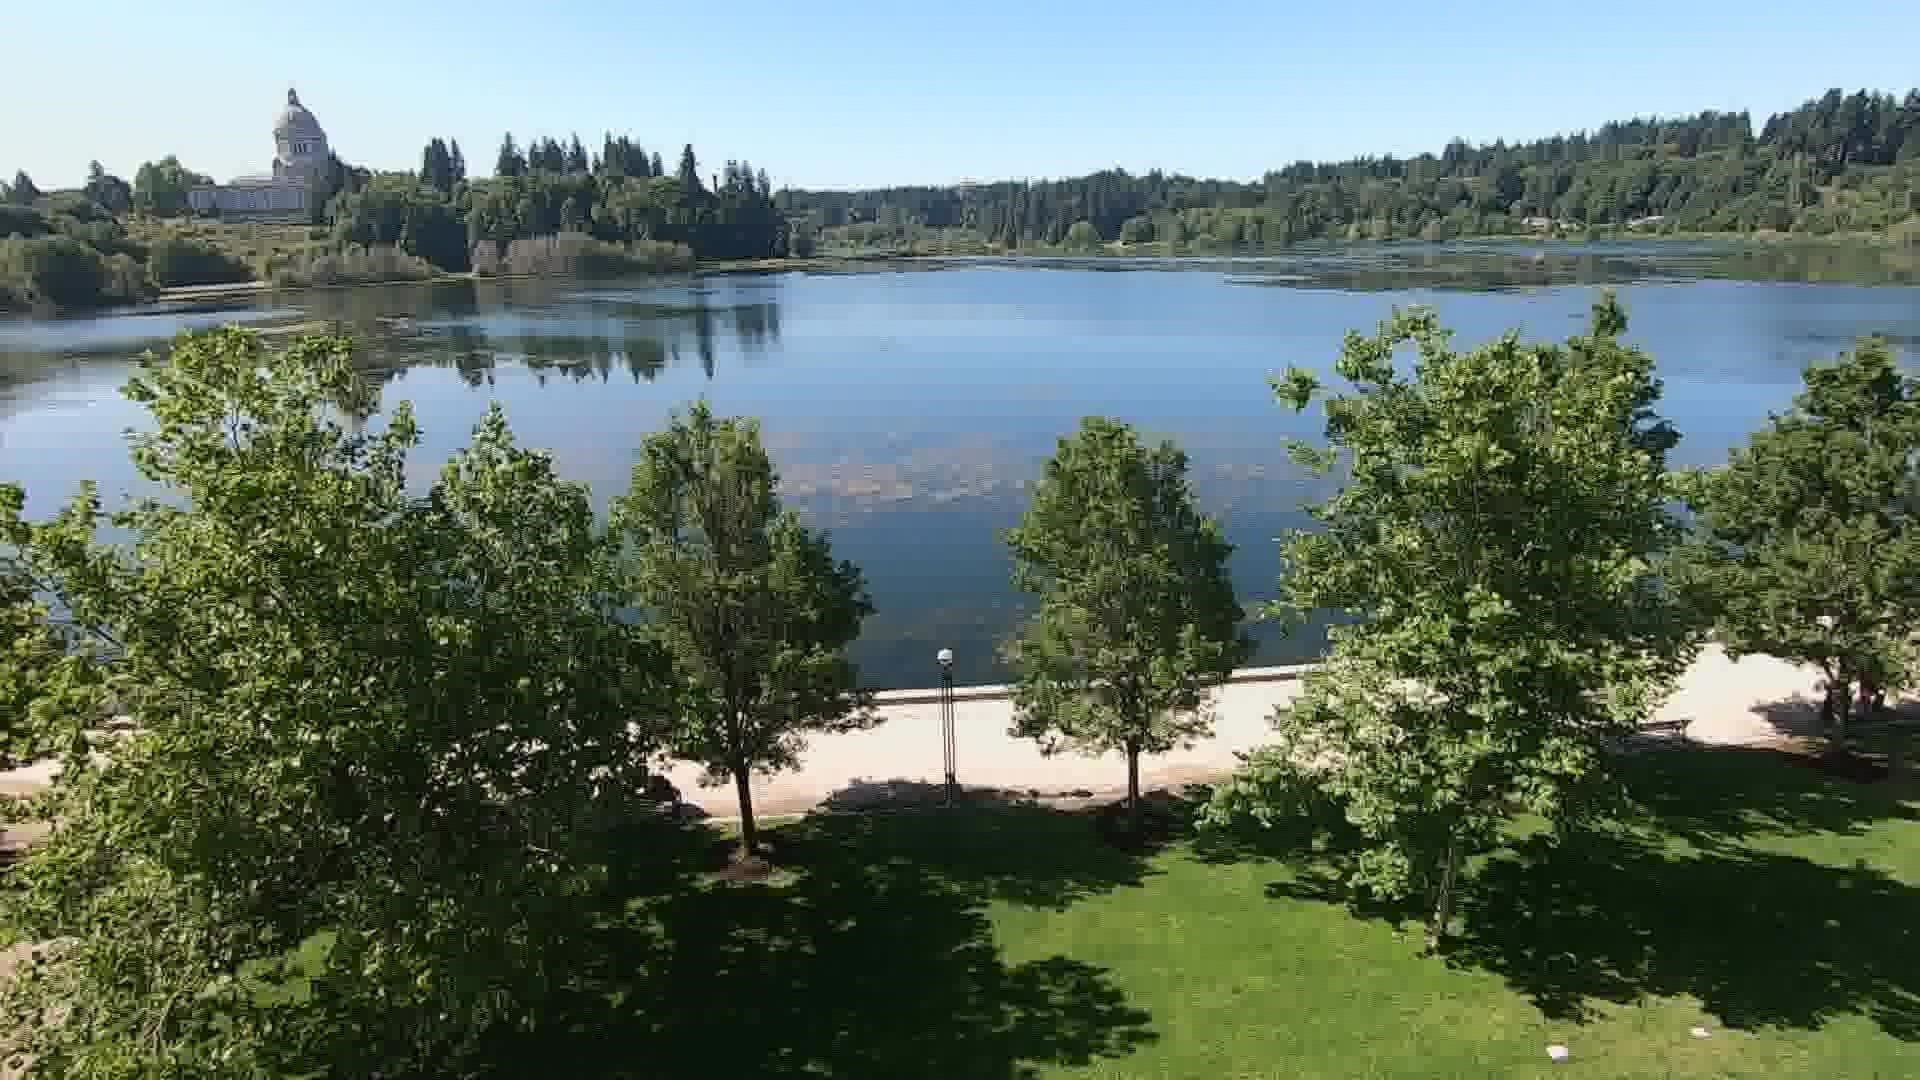 The Olympia lake, once open for swimming and boating, has been closed to public use for more than a decade.